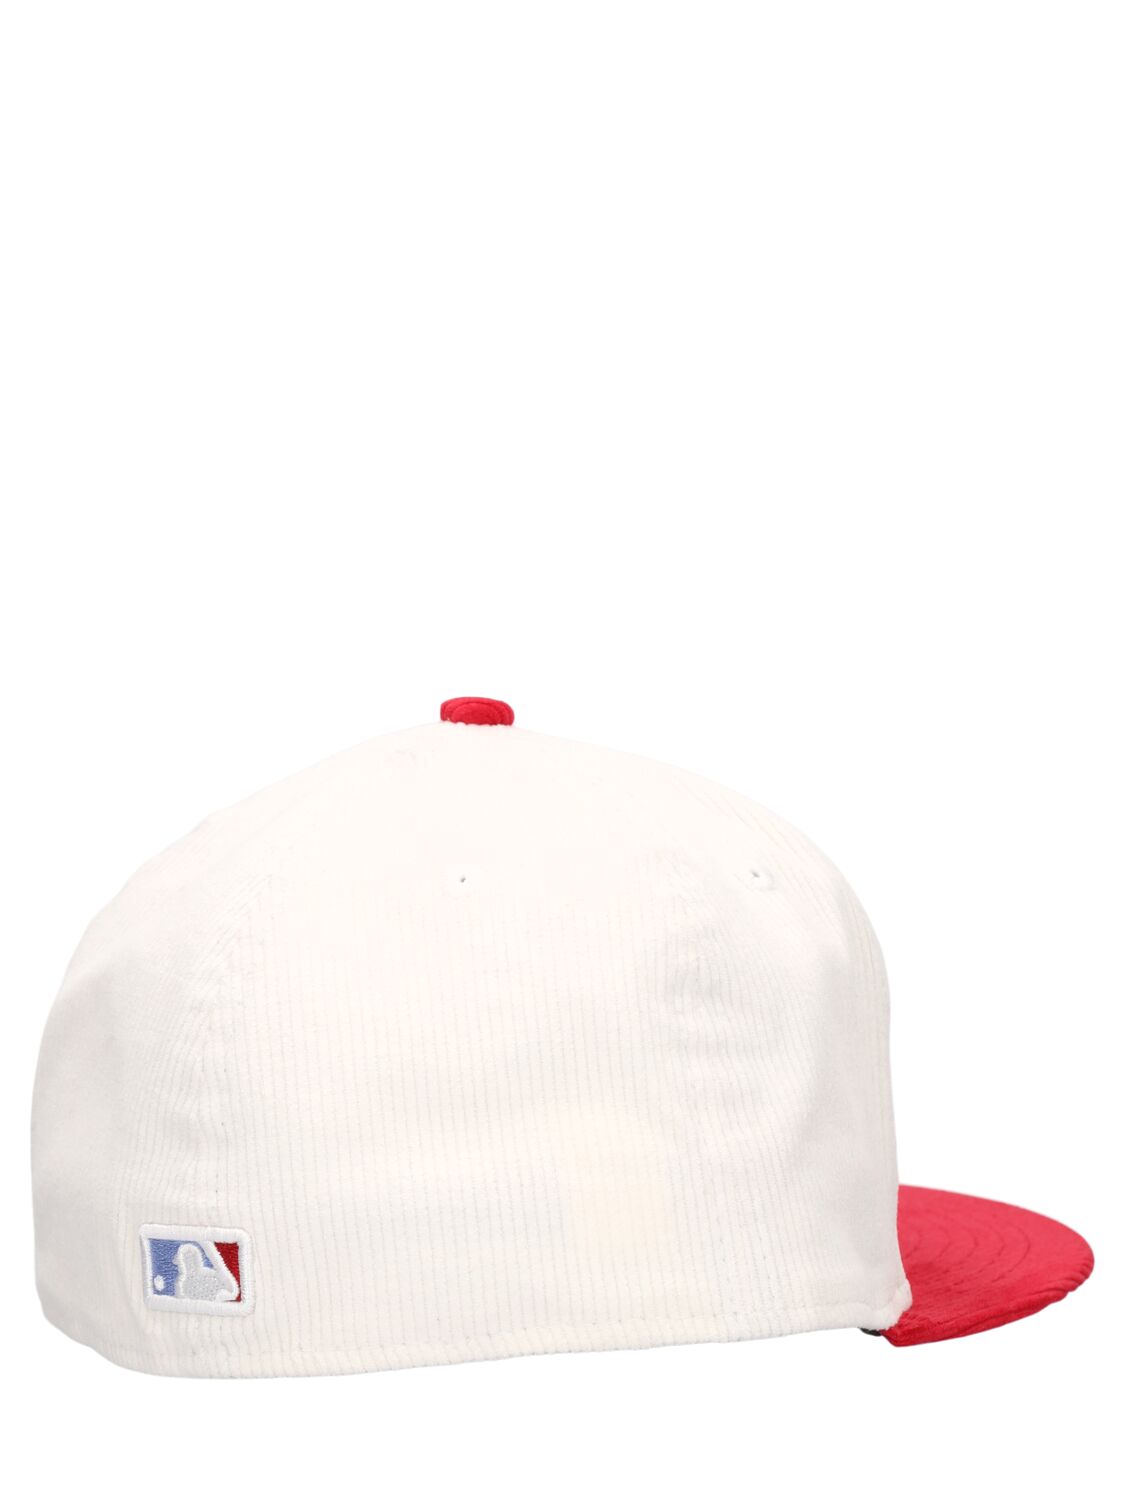 Shop New Era Ny Yankees 59fifty Cap In Beige,red